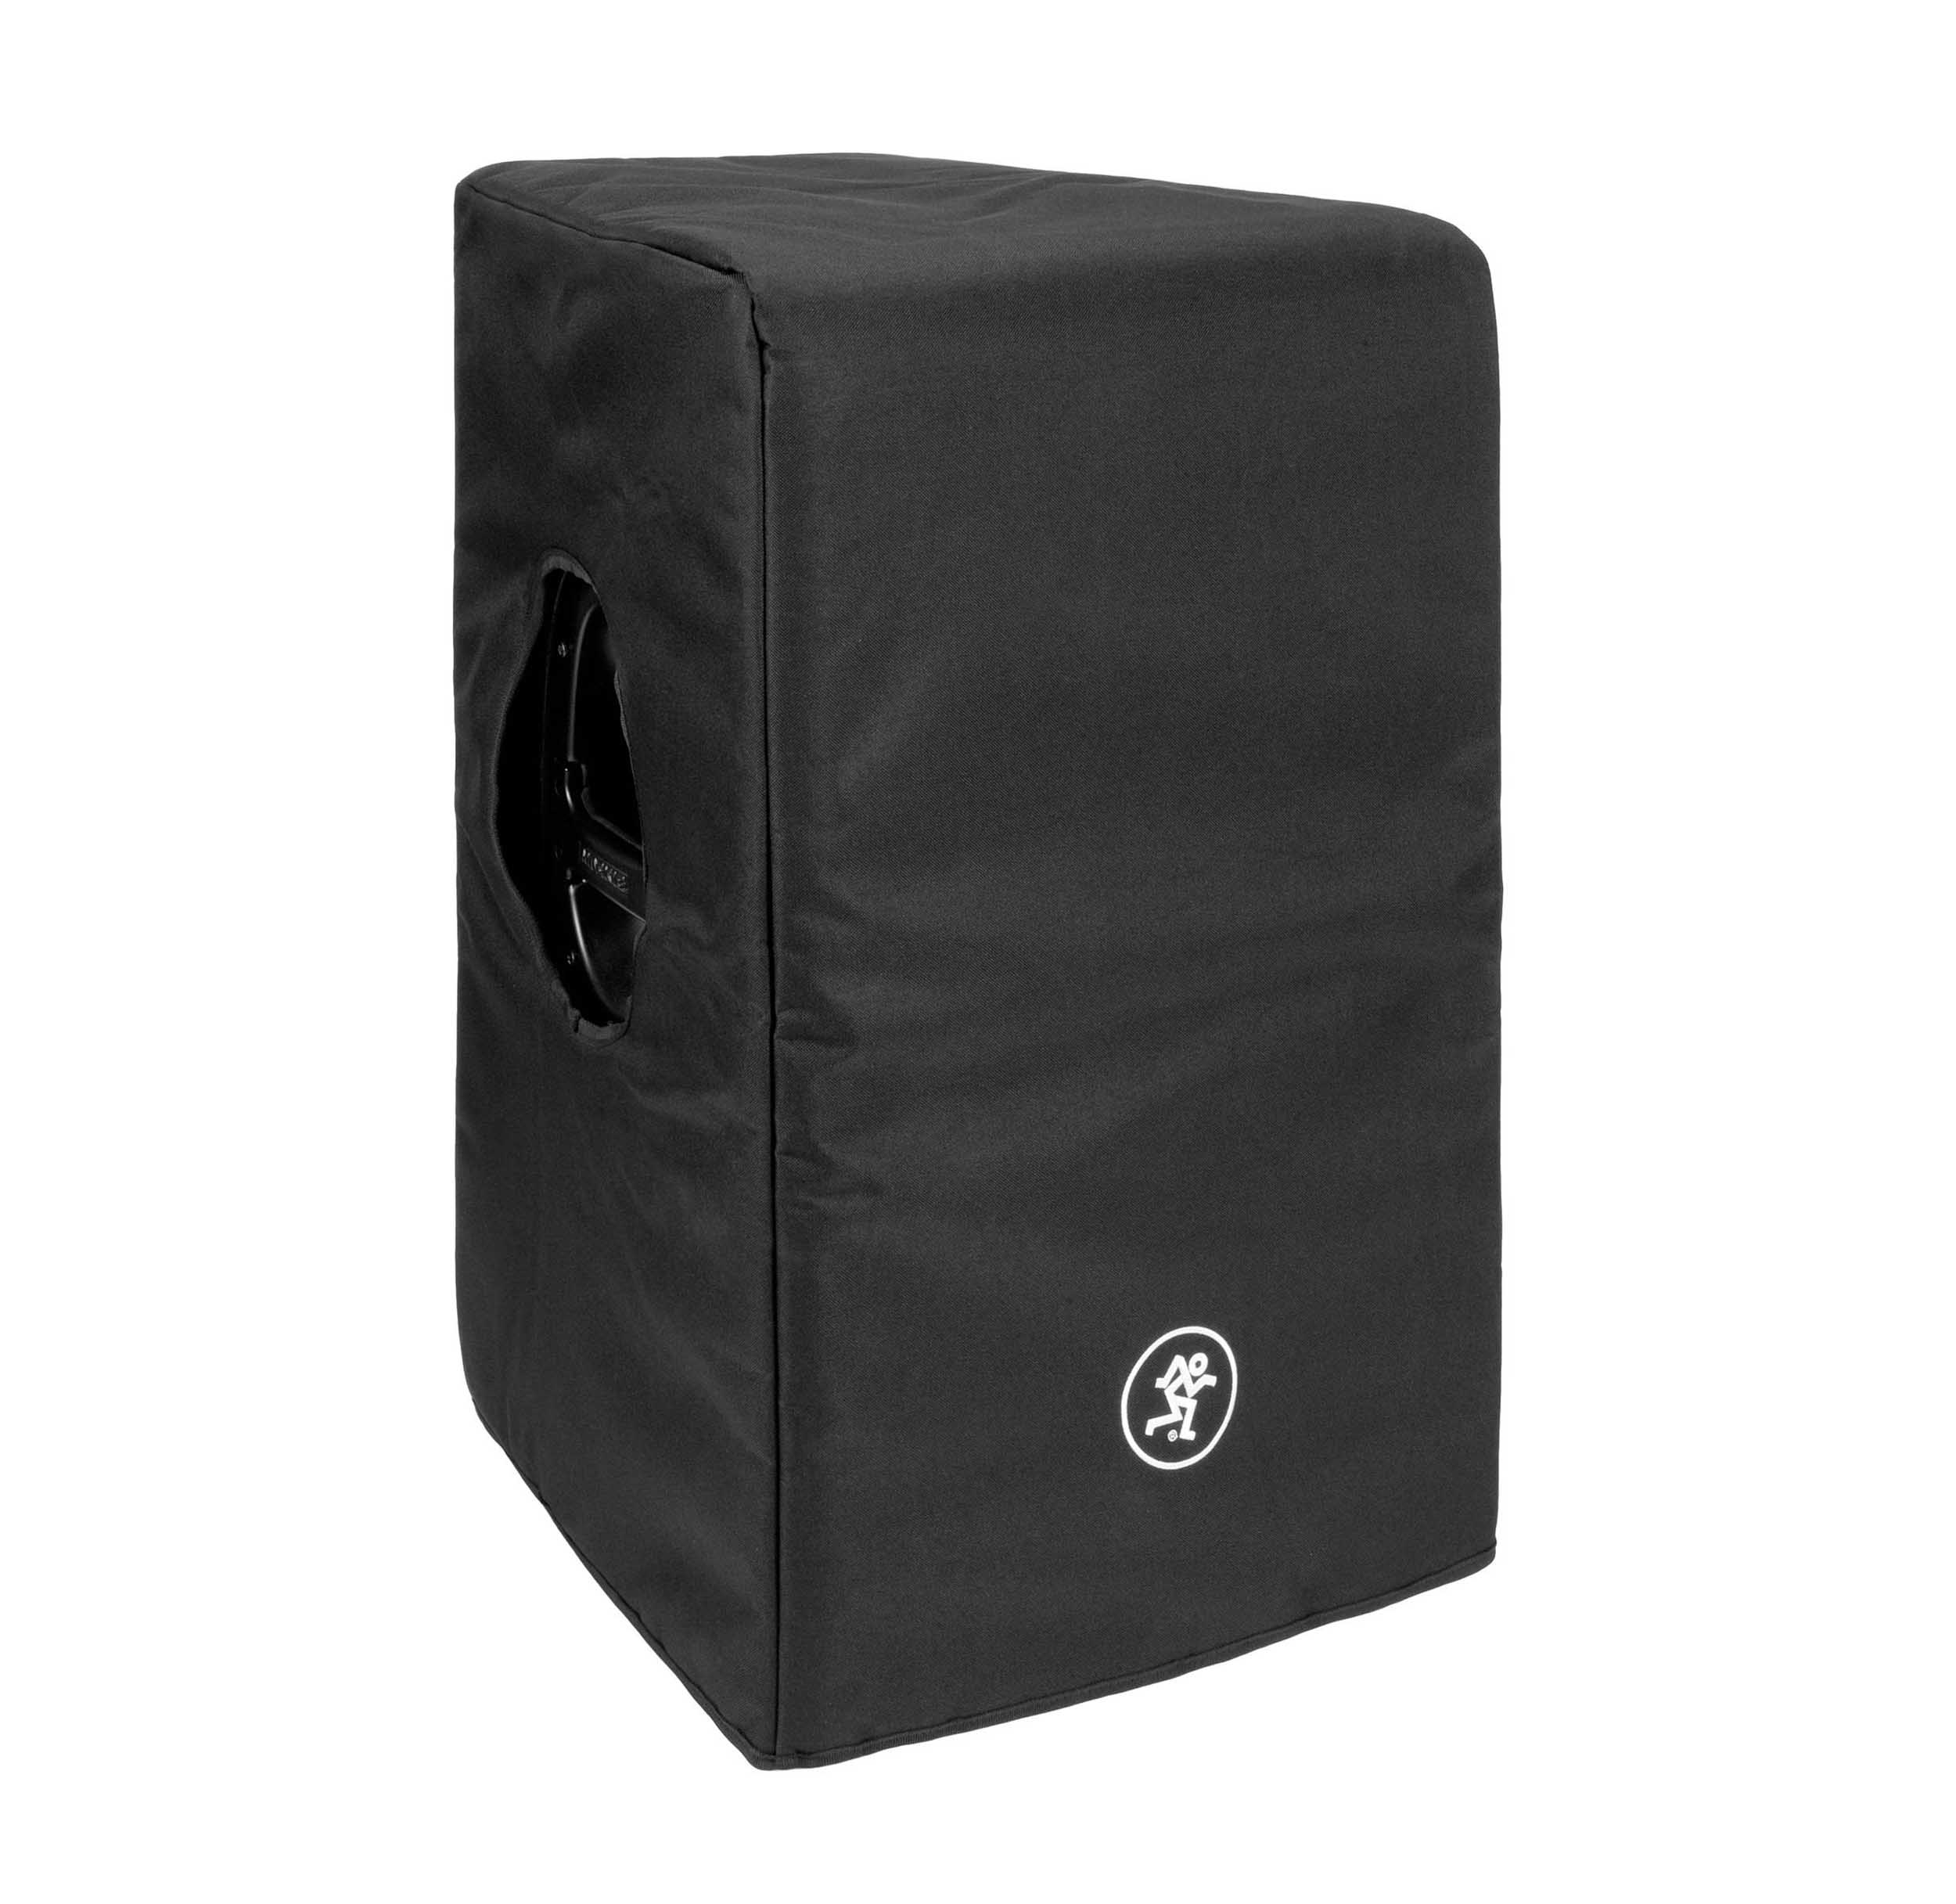 Mackie DRM315 Cover, Speaker Cover for DRM315 and DRM315-P Loudspeaker by Mackie